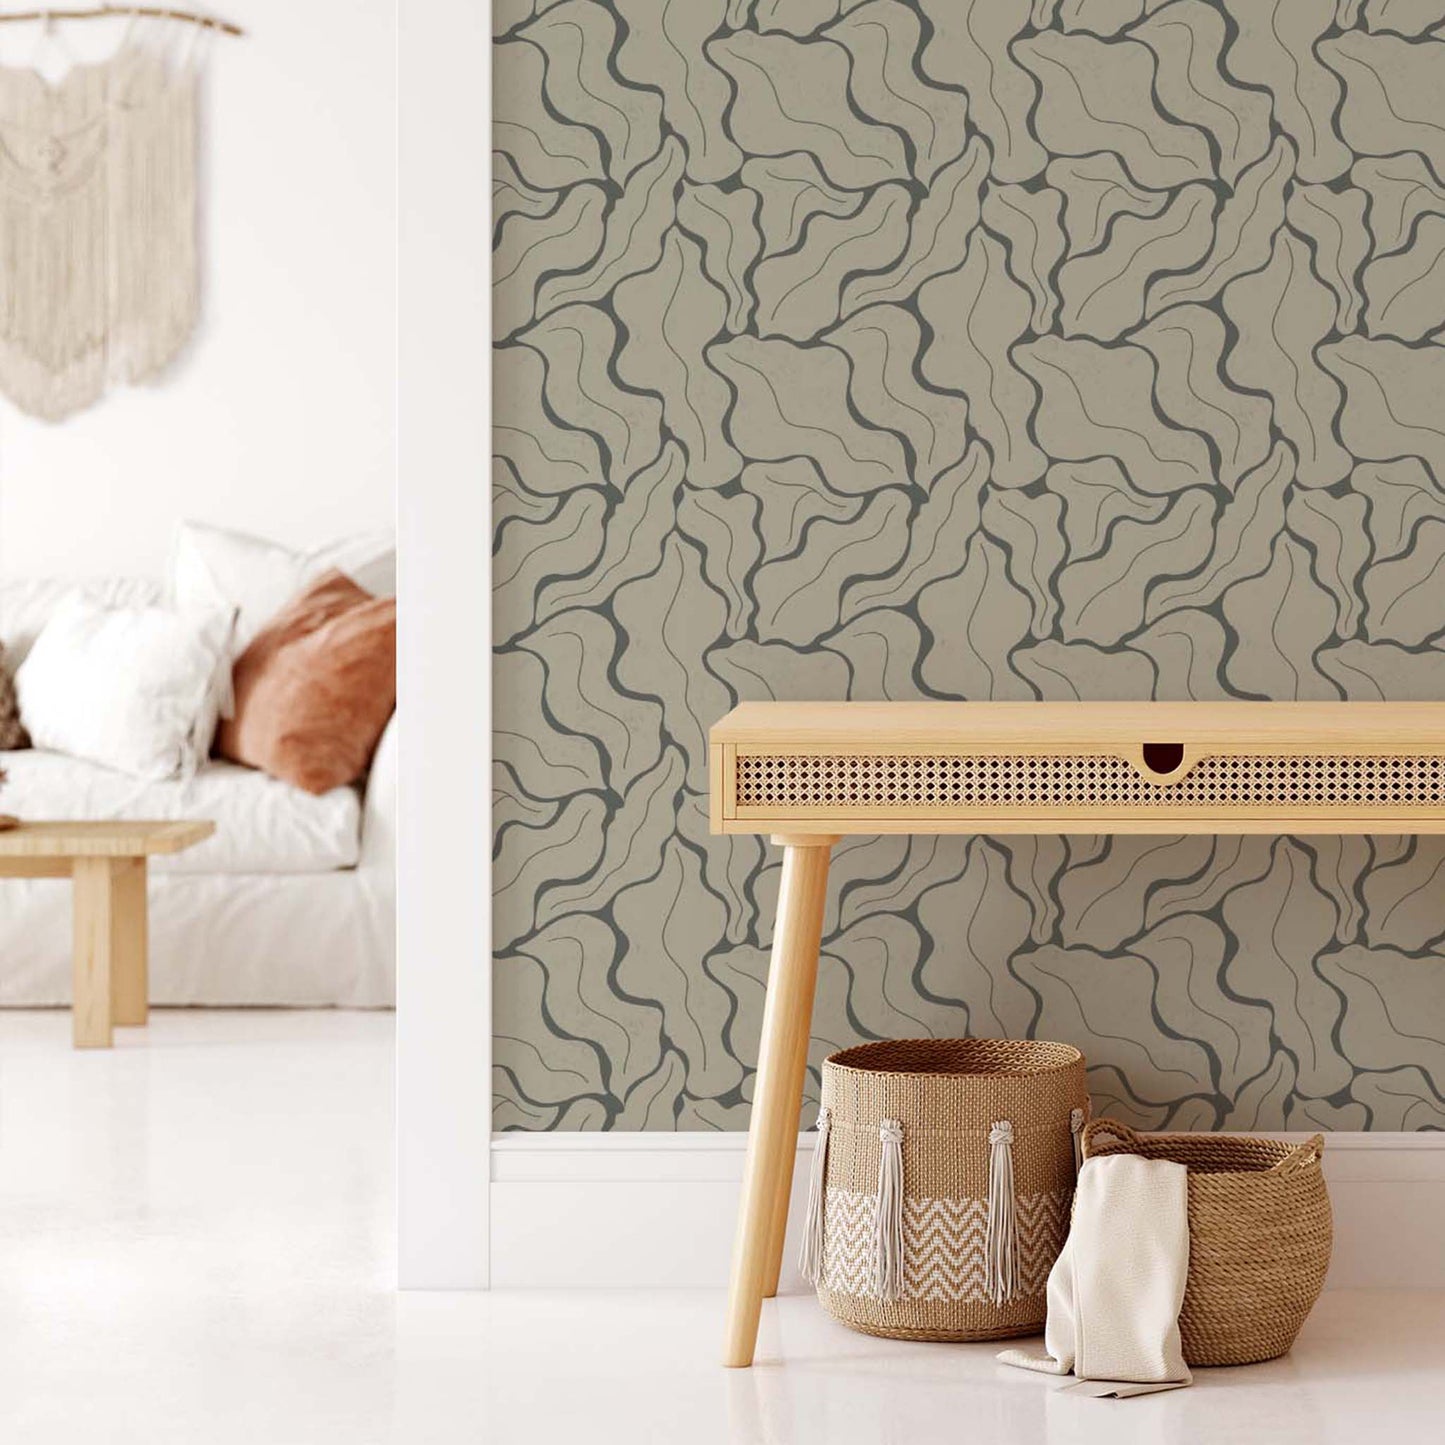 Living Room featuring our Modern Leaves Wallpaper in Sage by artist Brenda Bird for Ayara